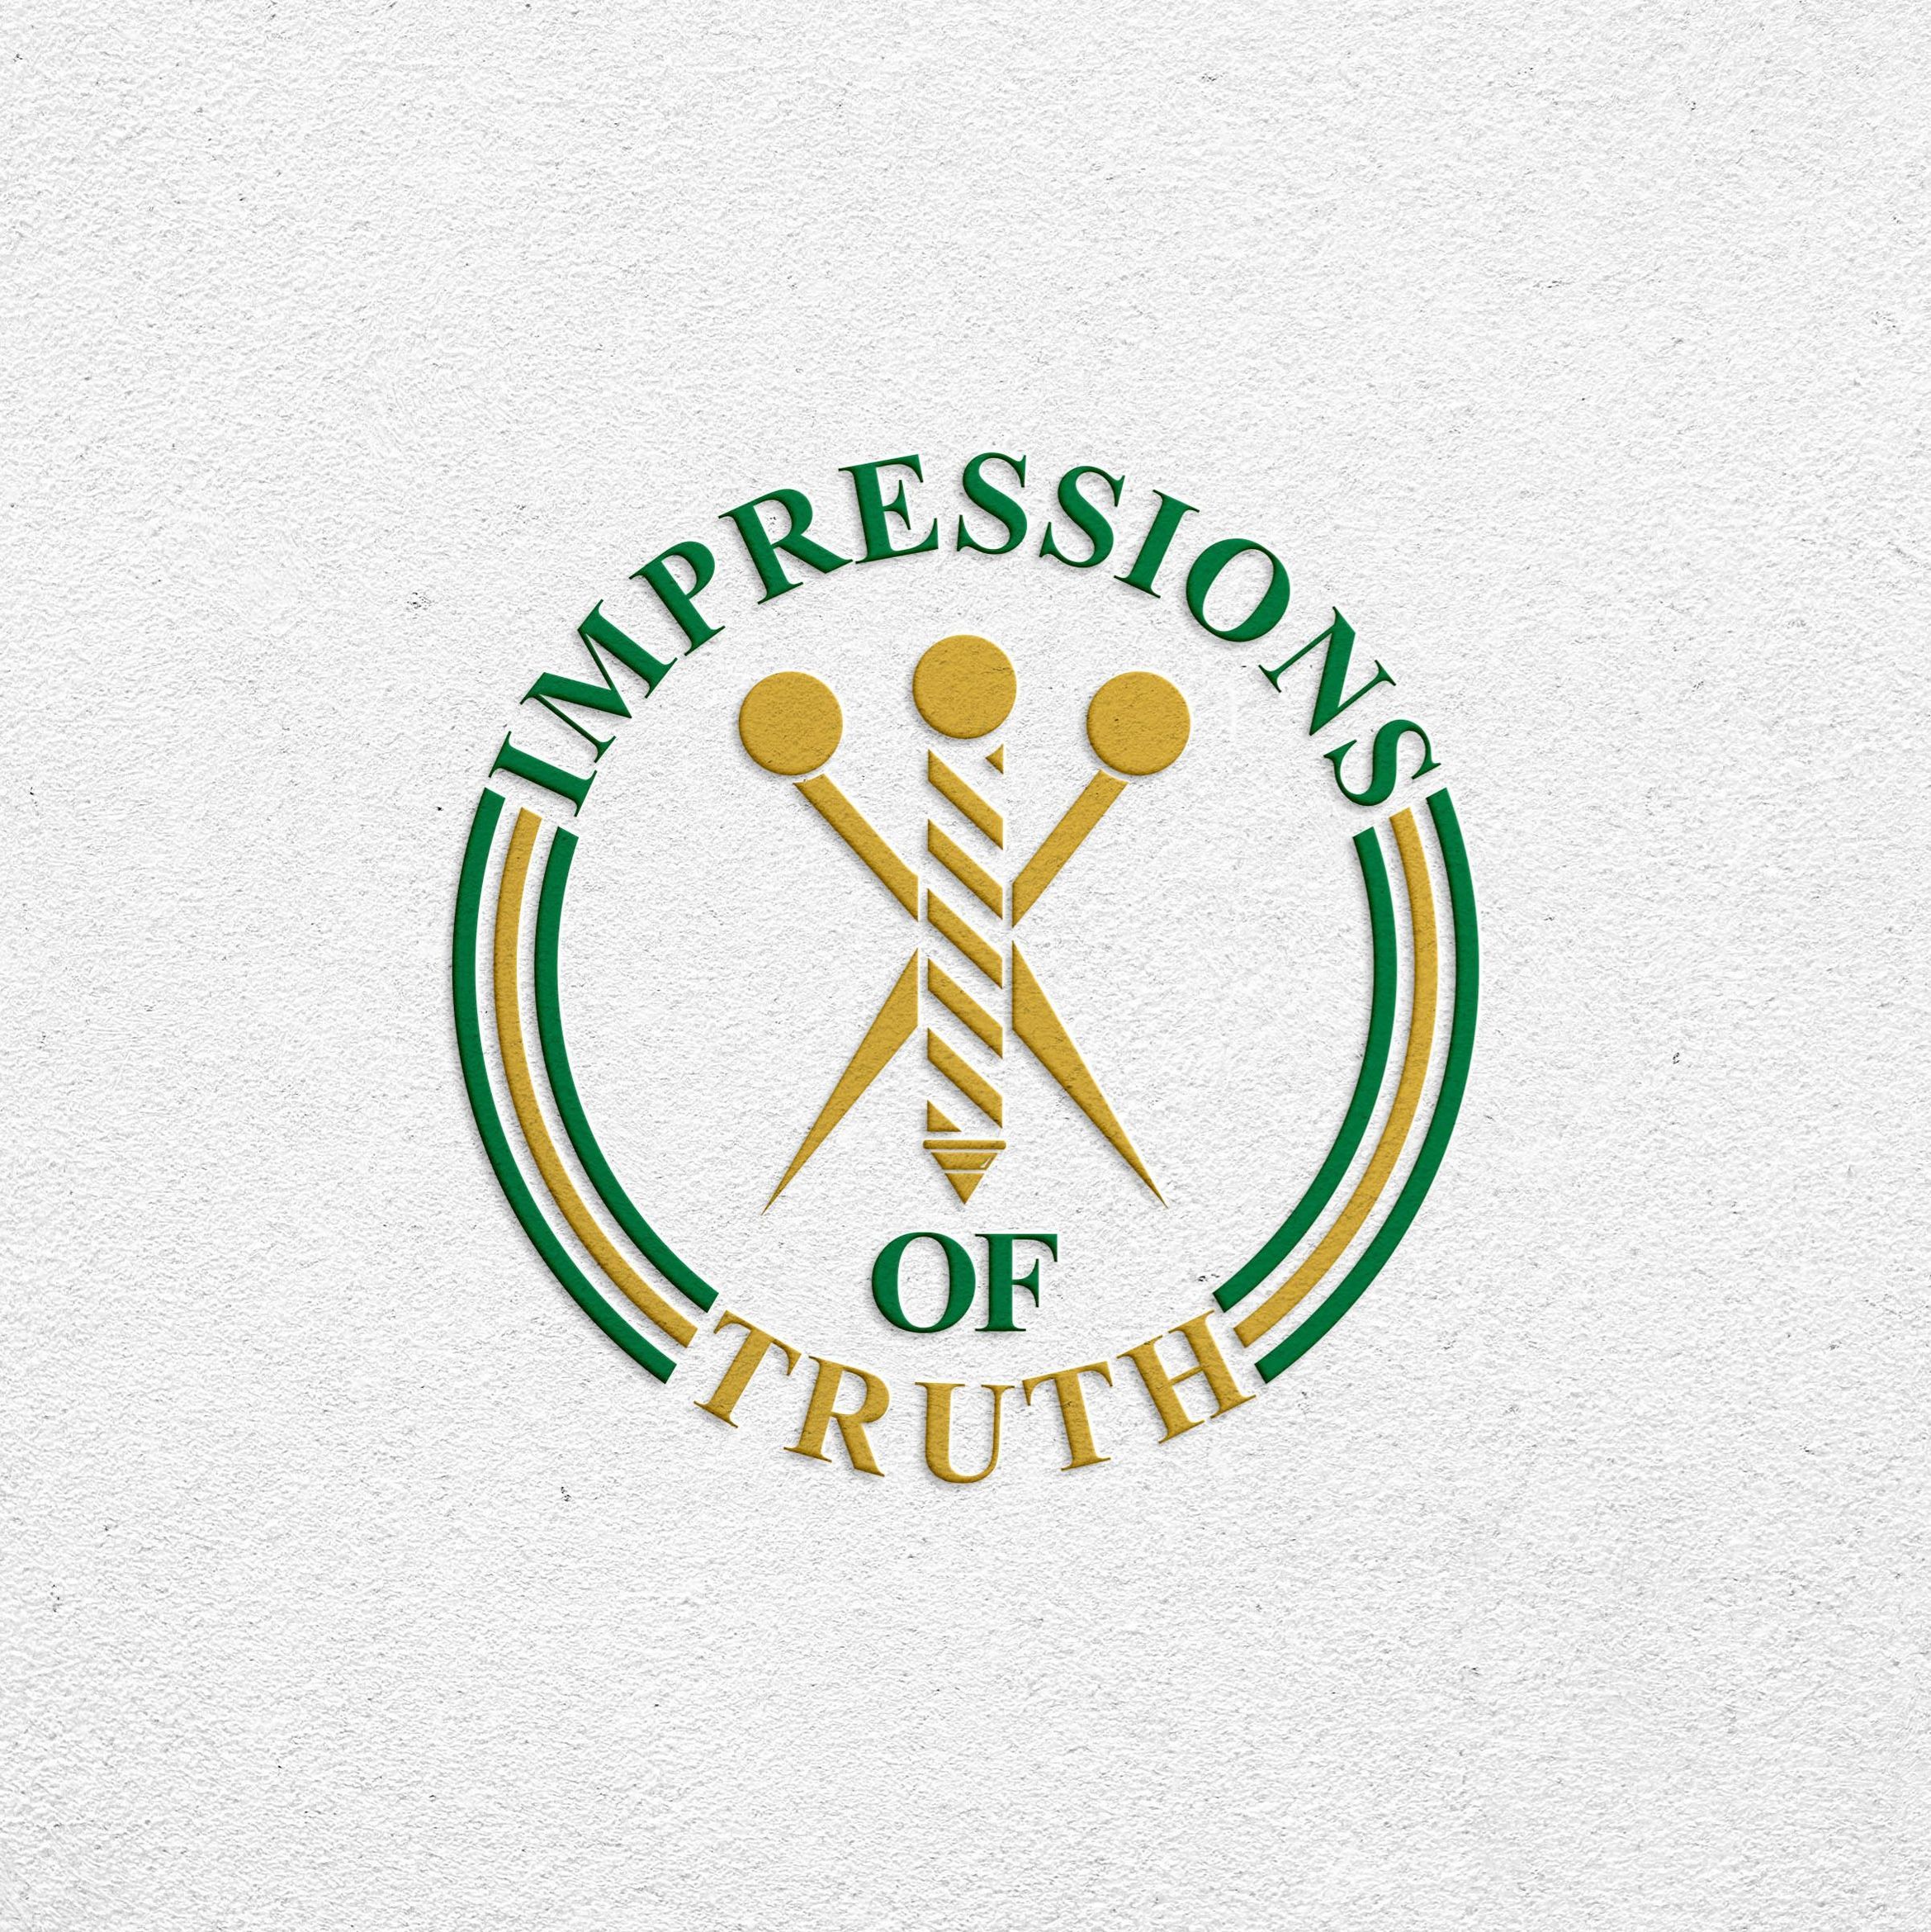 Impressions Of Truth, 1217 West State Hwy 114, Suite 124 Rm 25, Grapevine, 76051